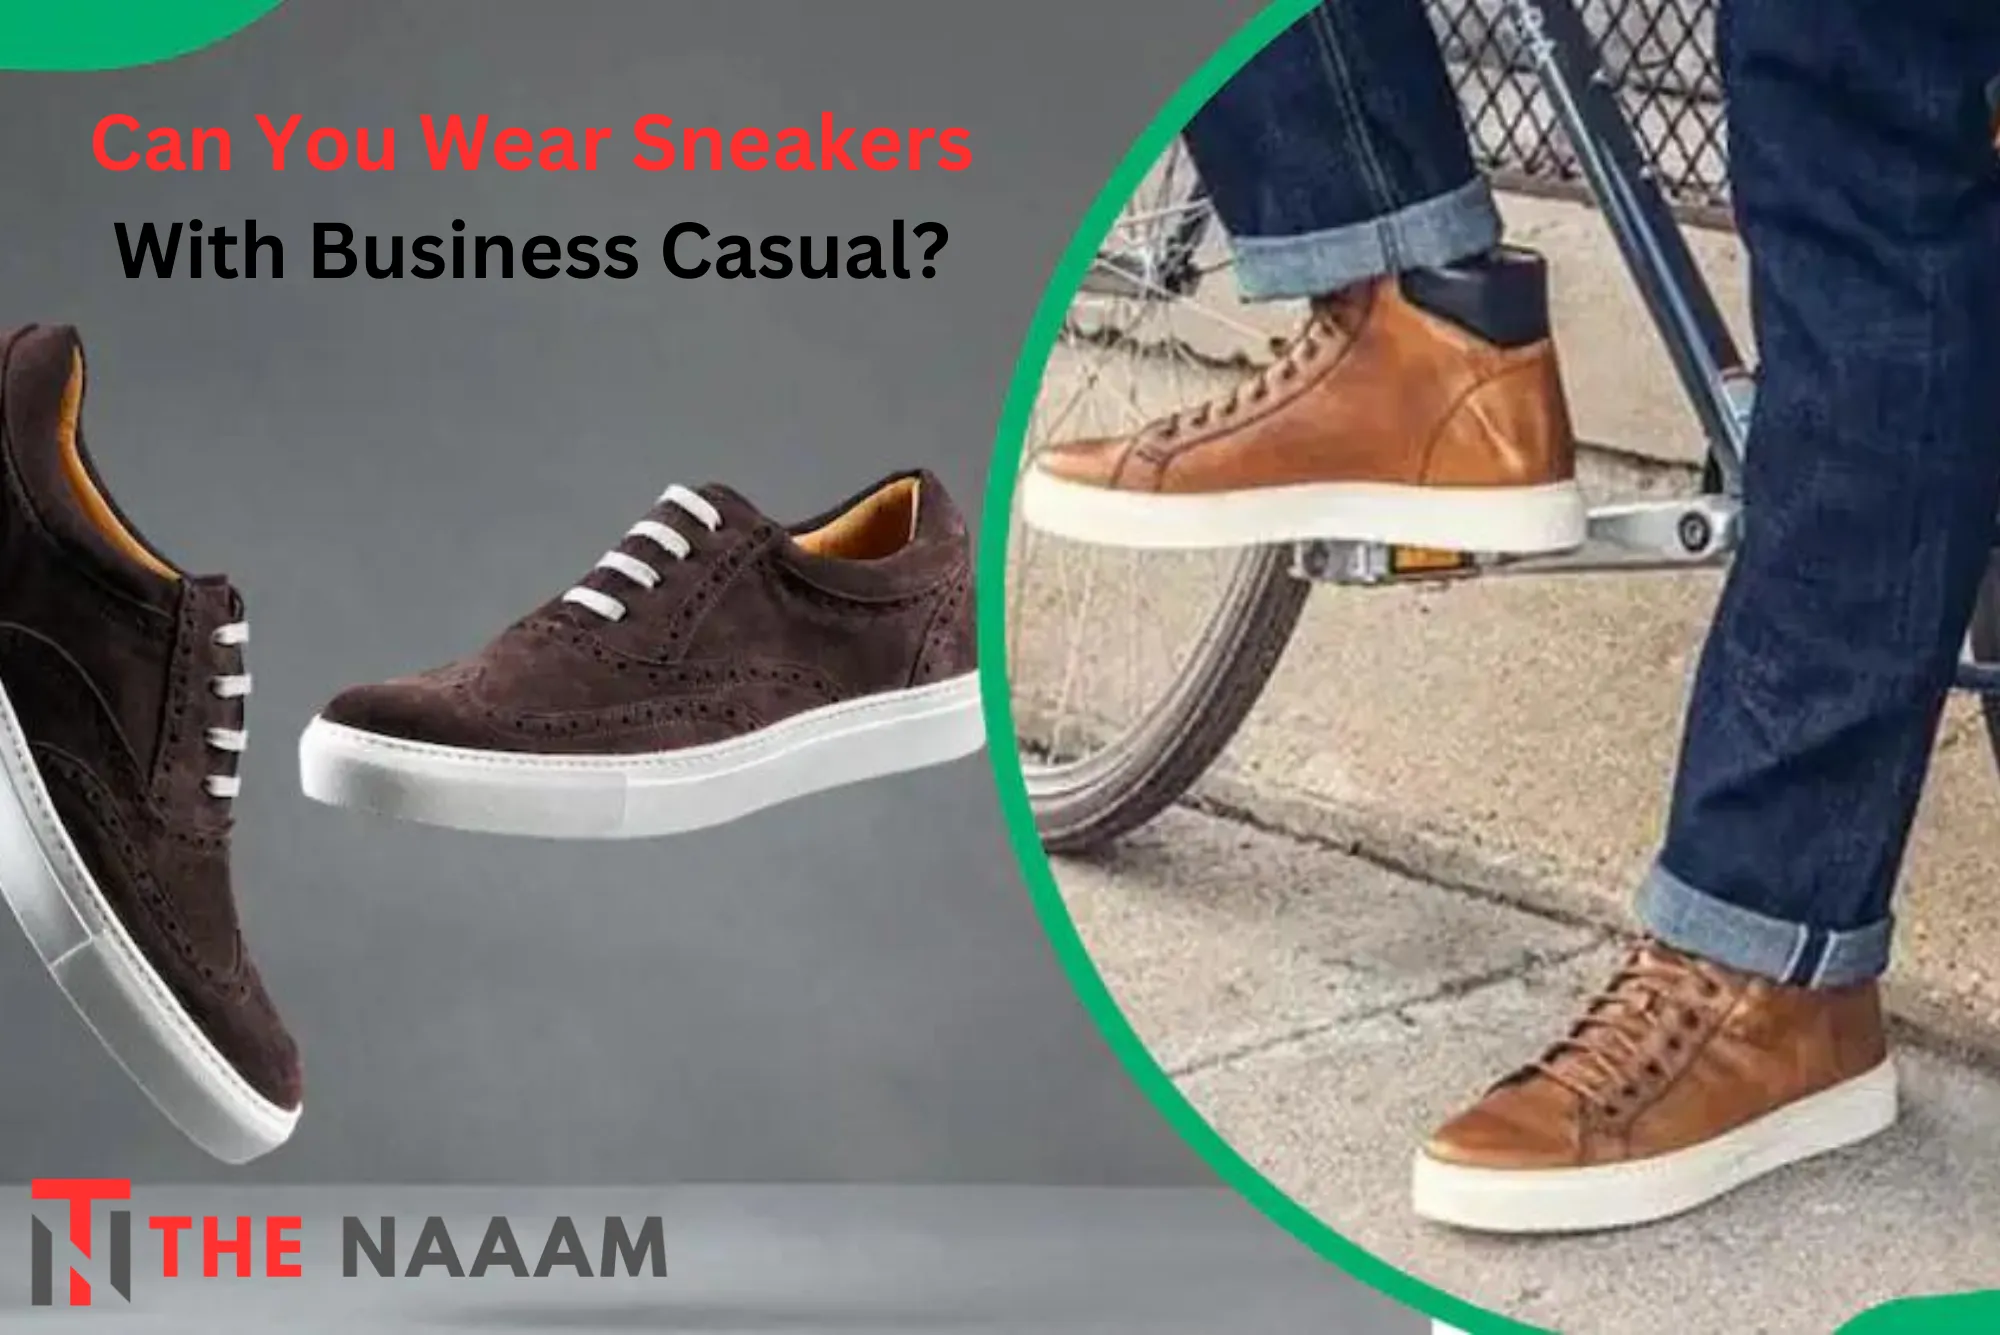 Can You Wear Sneakers With Business Casual?